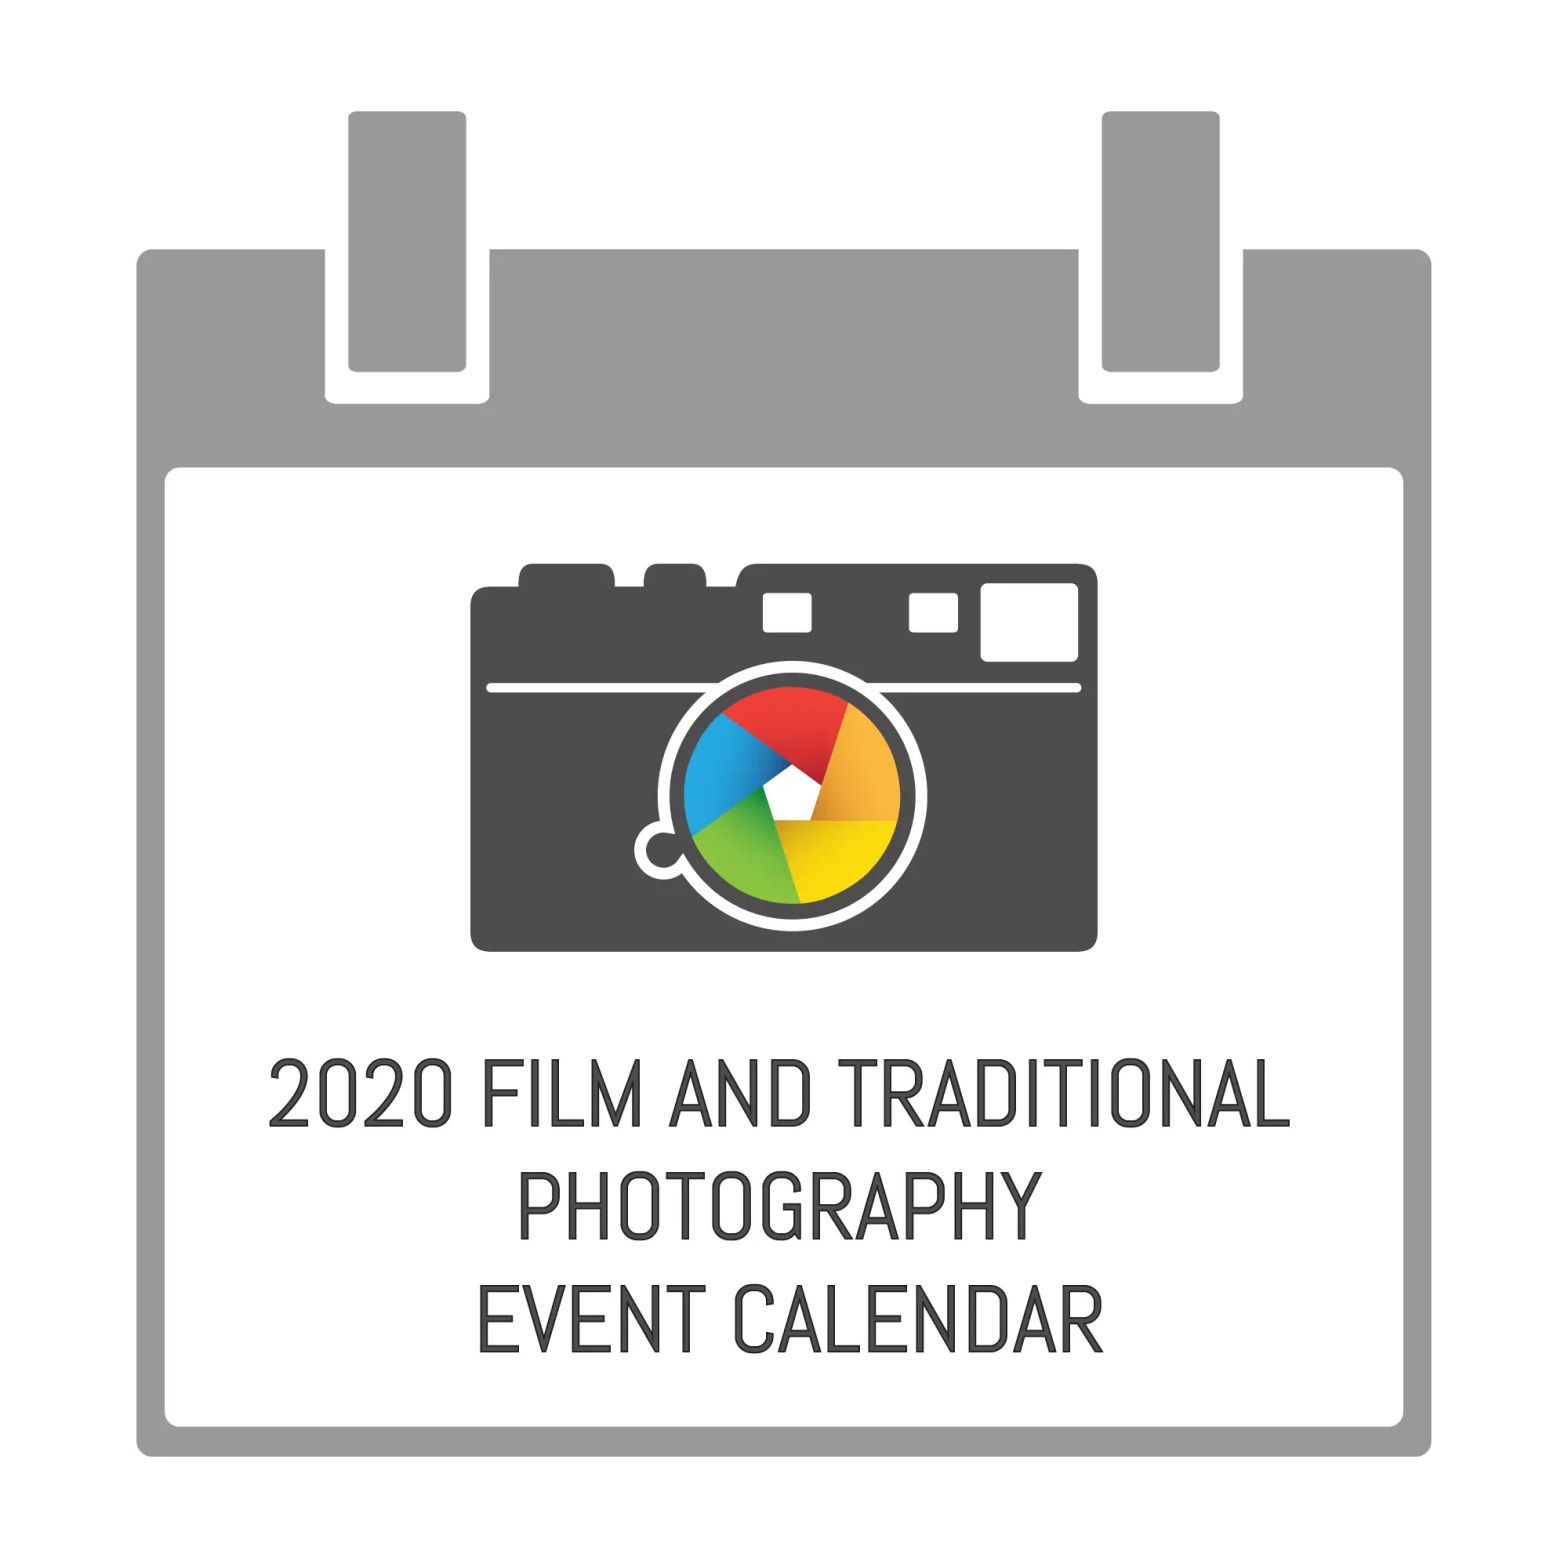 2020 film and traditional photography event calendar